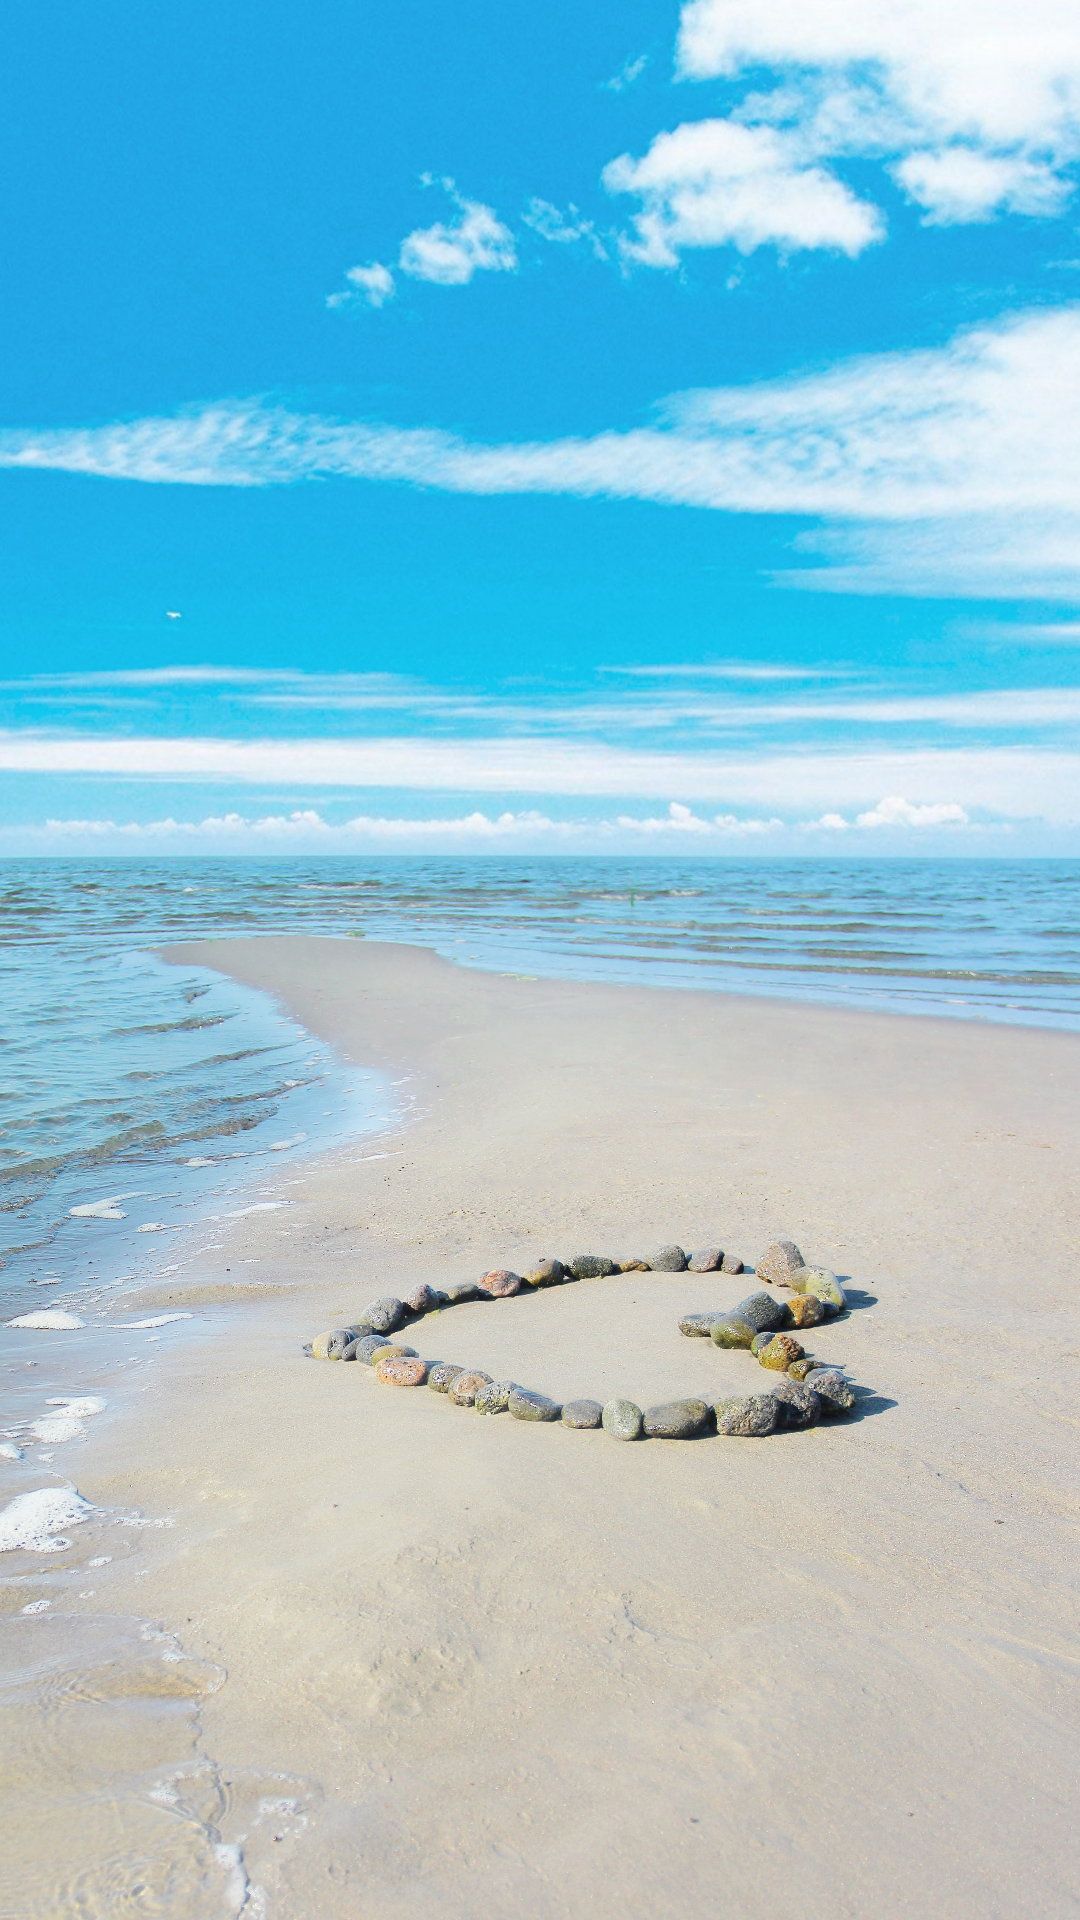 A heart shaped rock formation on the beach - Beach